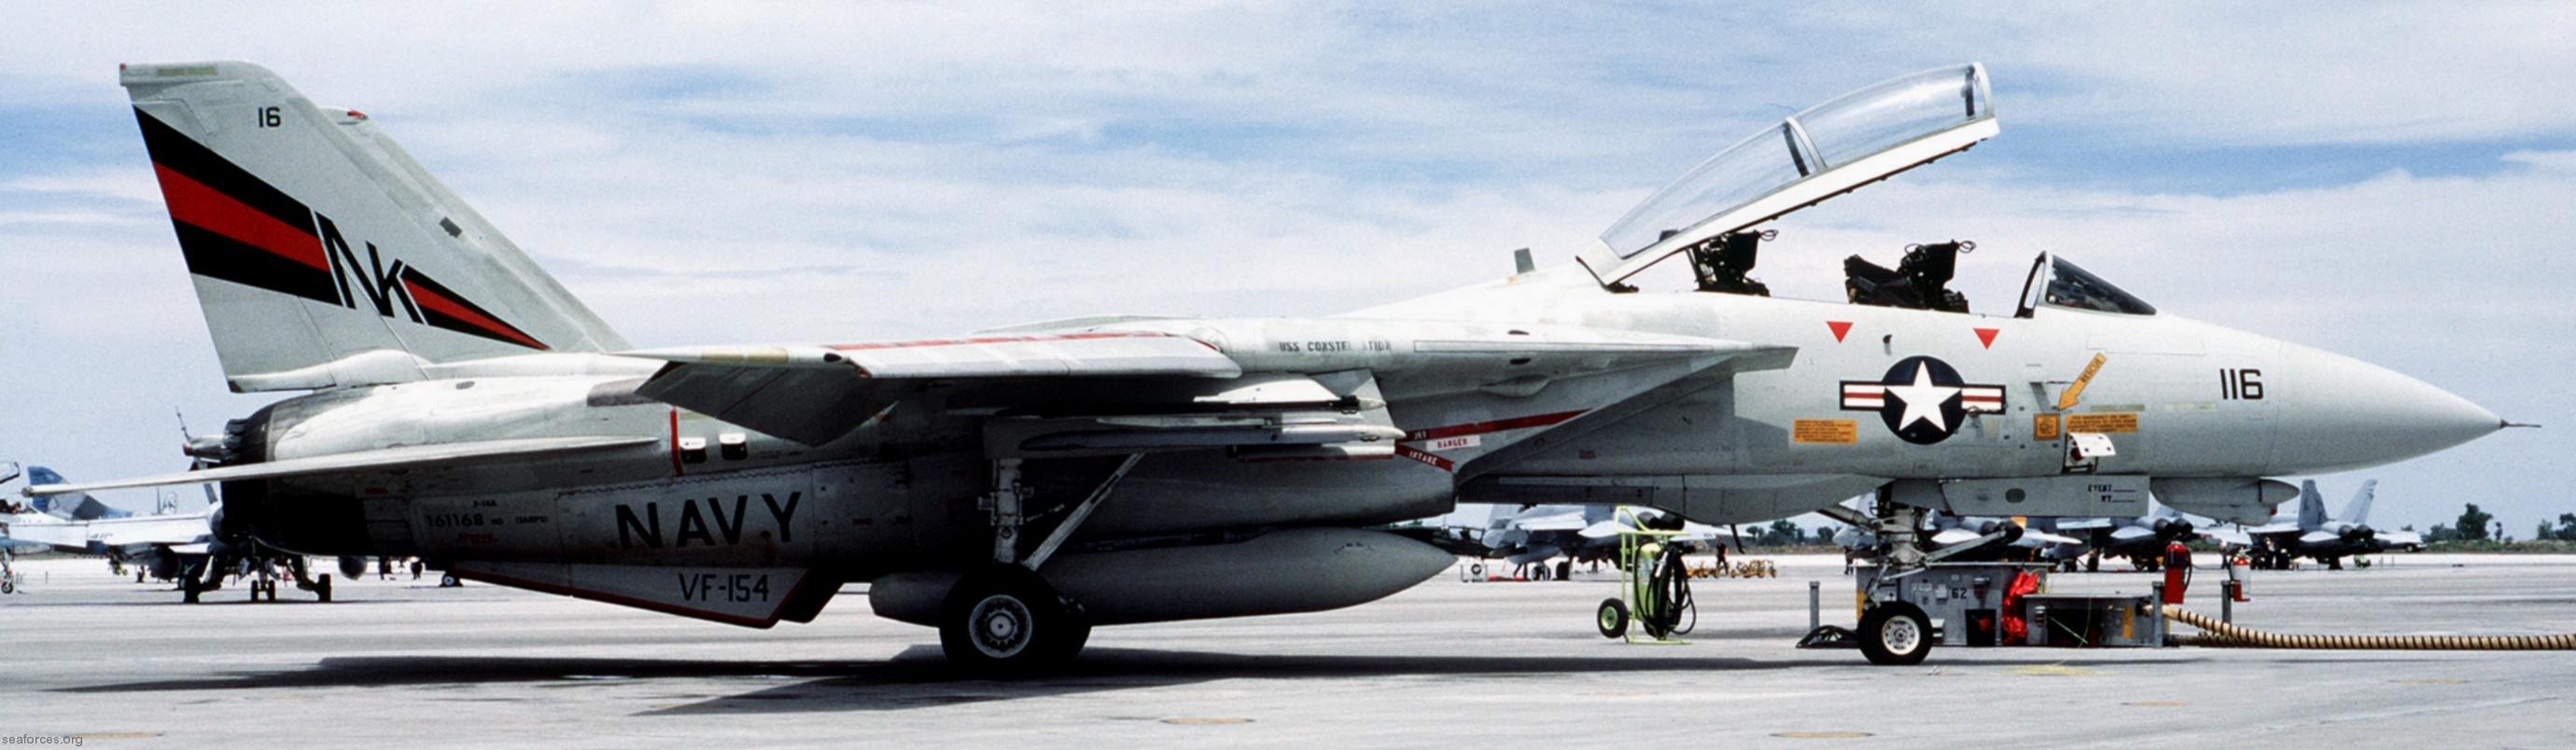 vf-154 black knights fighter squadron us navy f-14a tomcat carrier air wing cvw-14 10 nas fallon nevada